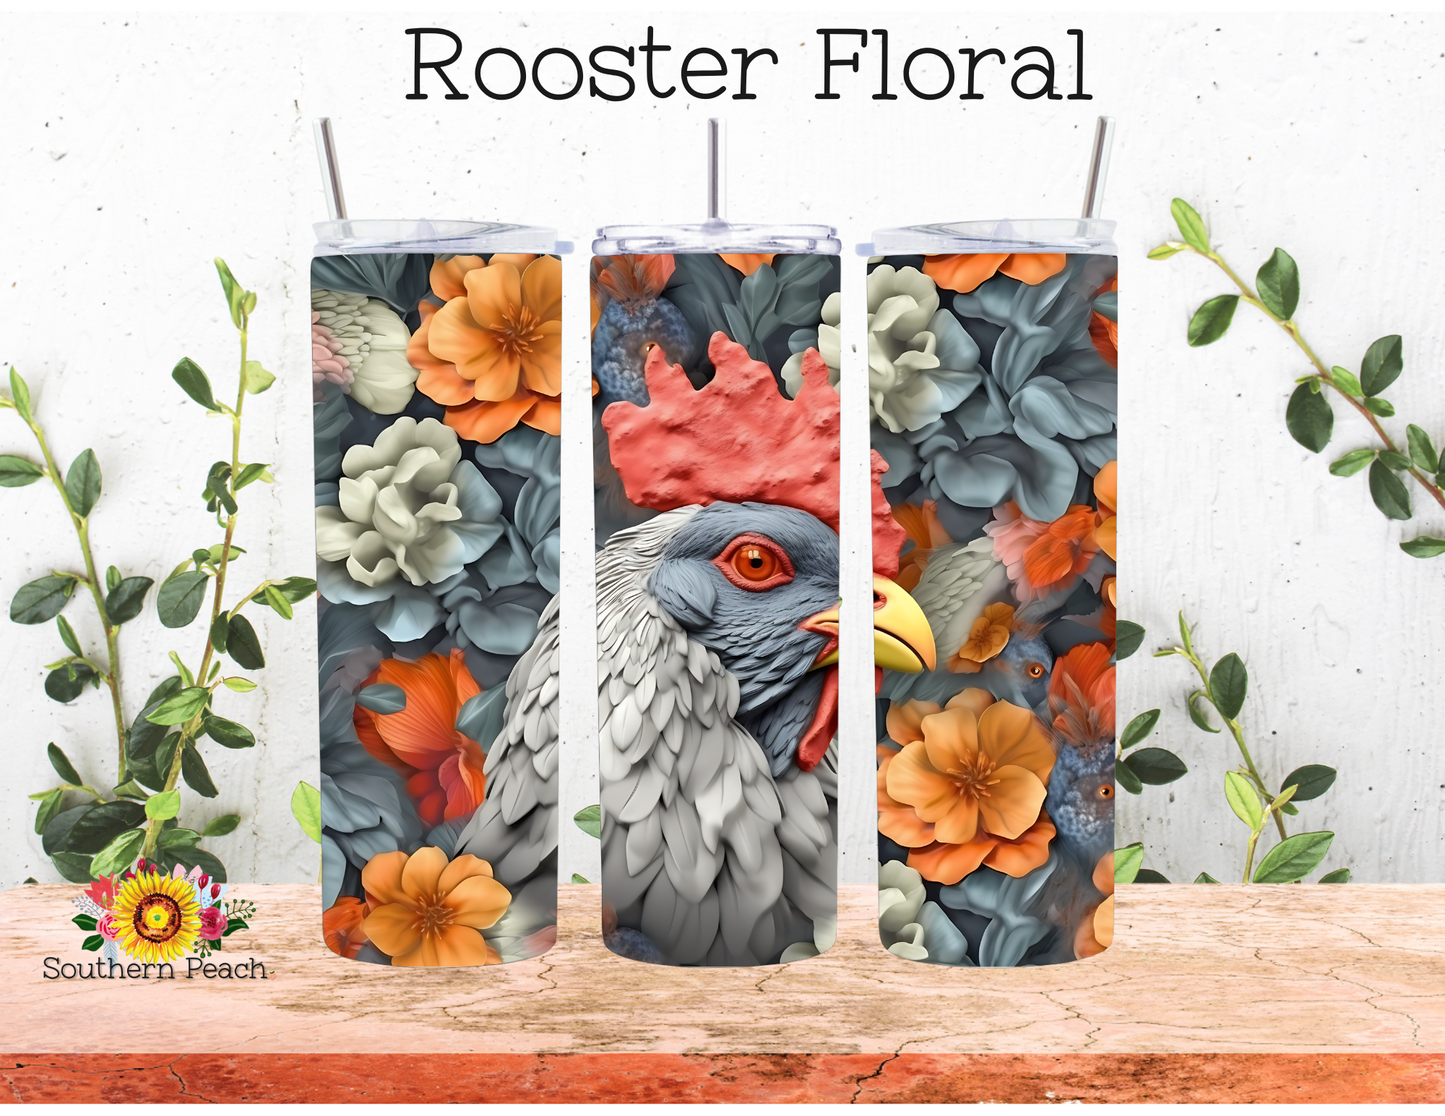 Rooster Floral